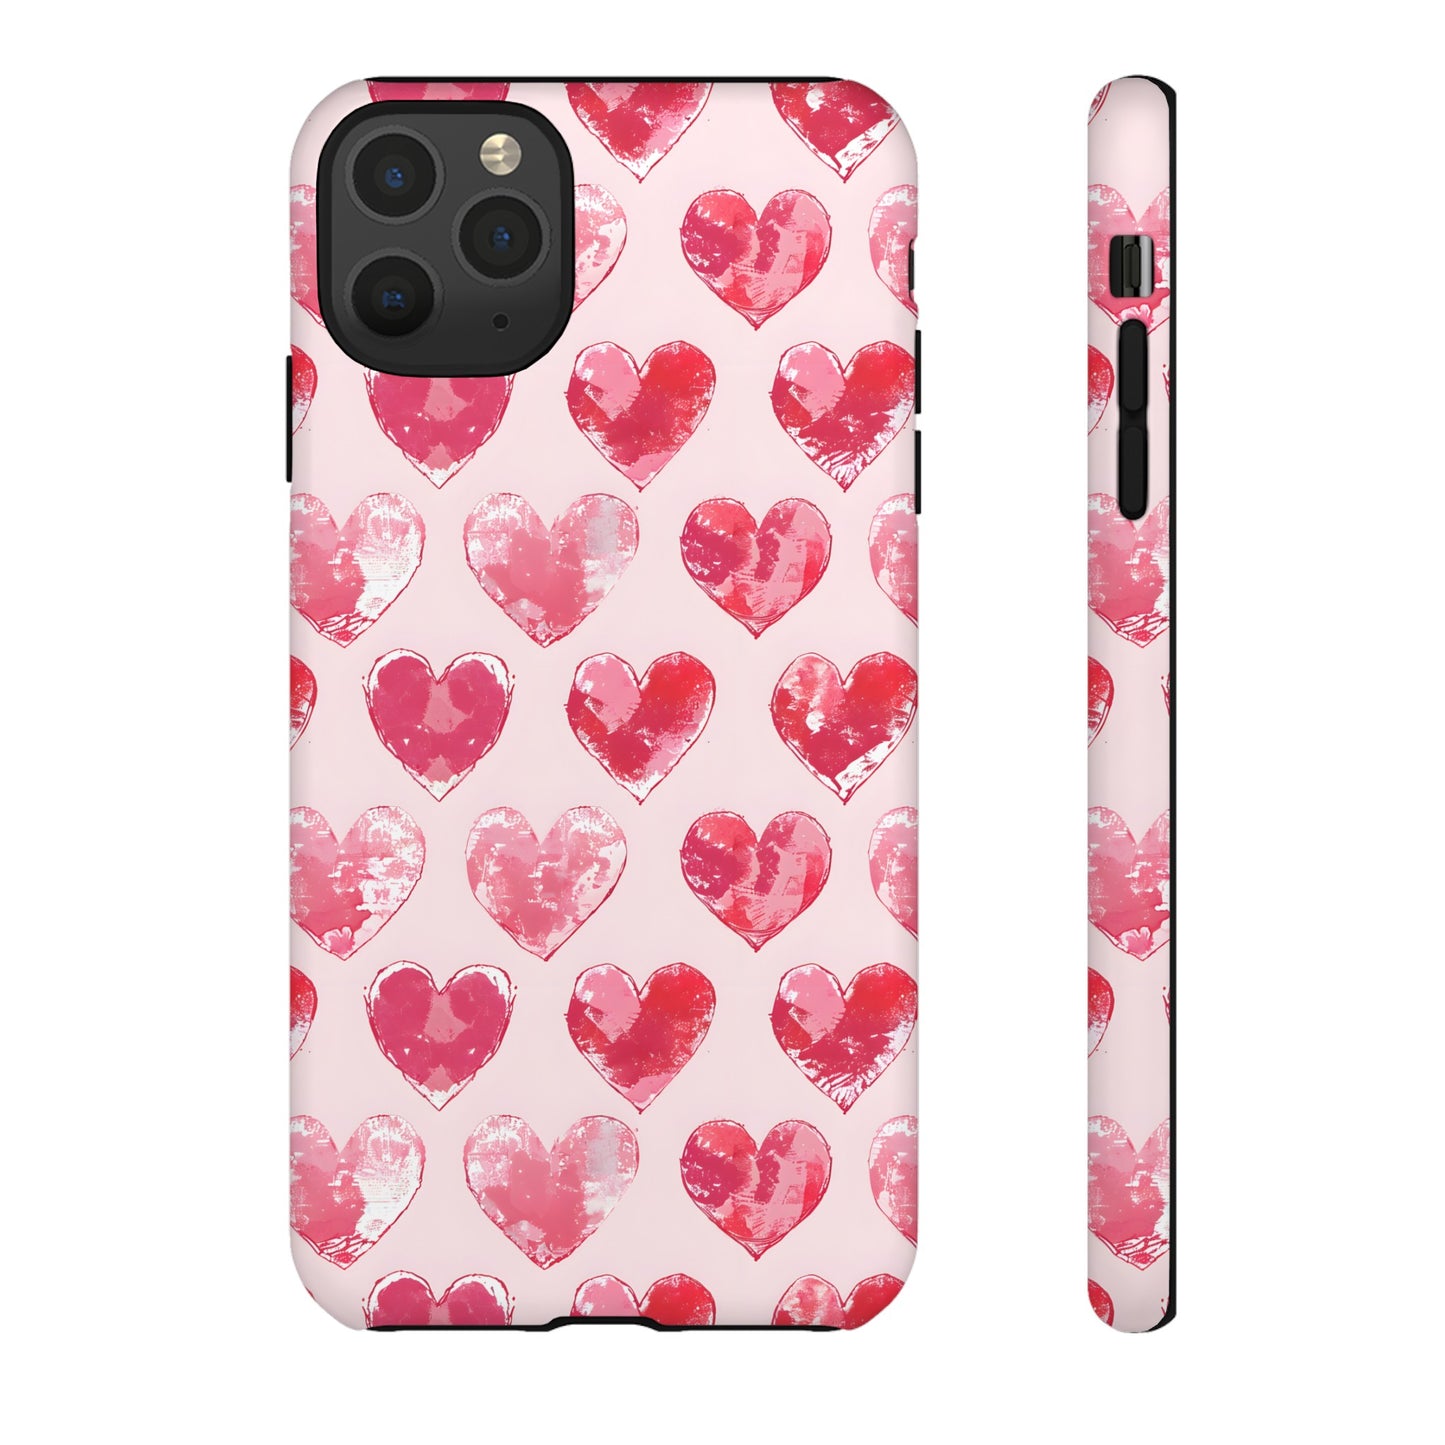 Blotted Love - Phone Case